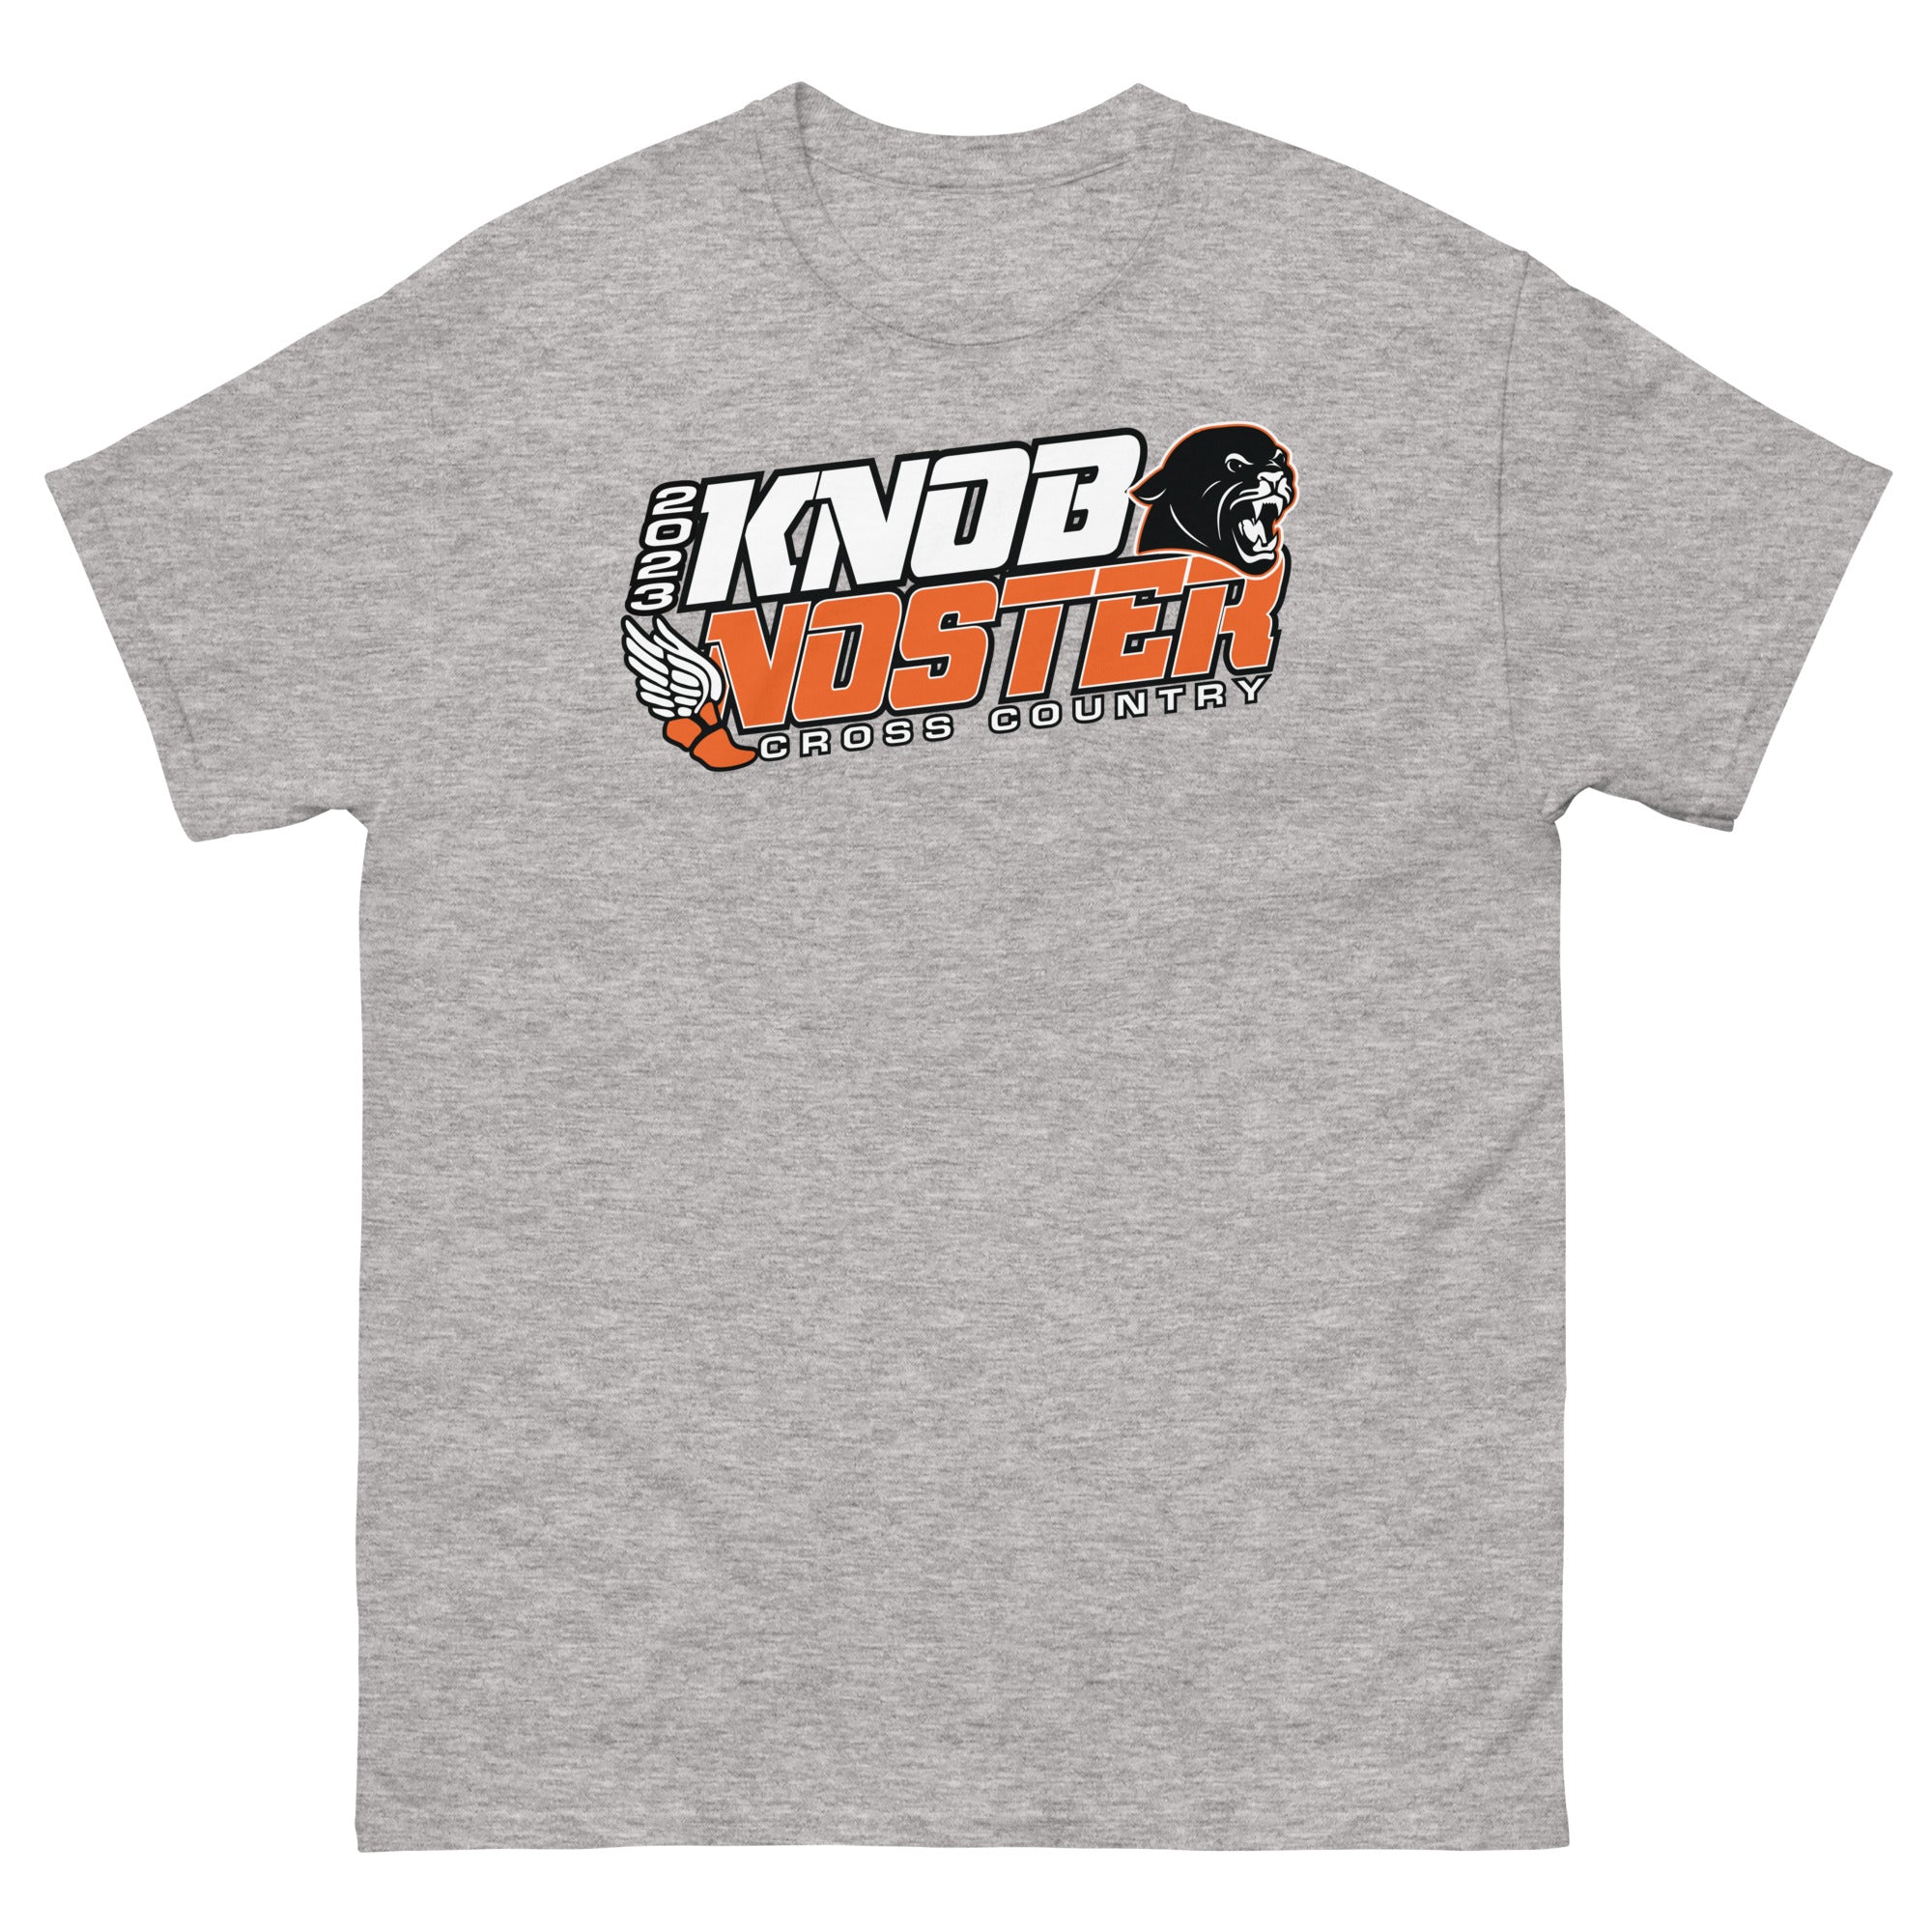 Knob Noster Cross Country Mens Classic Tee